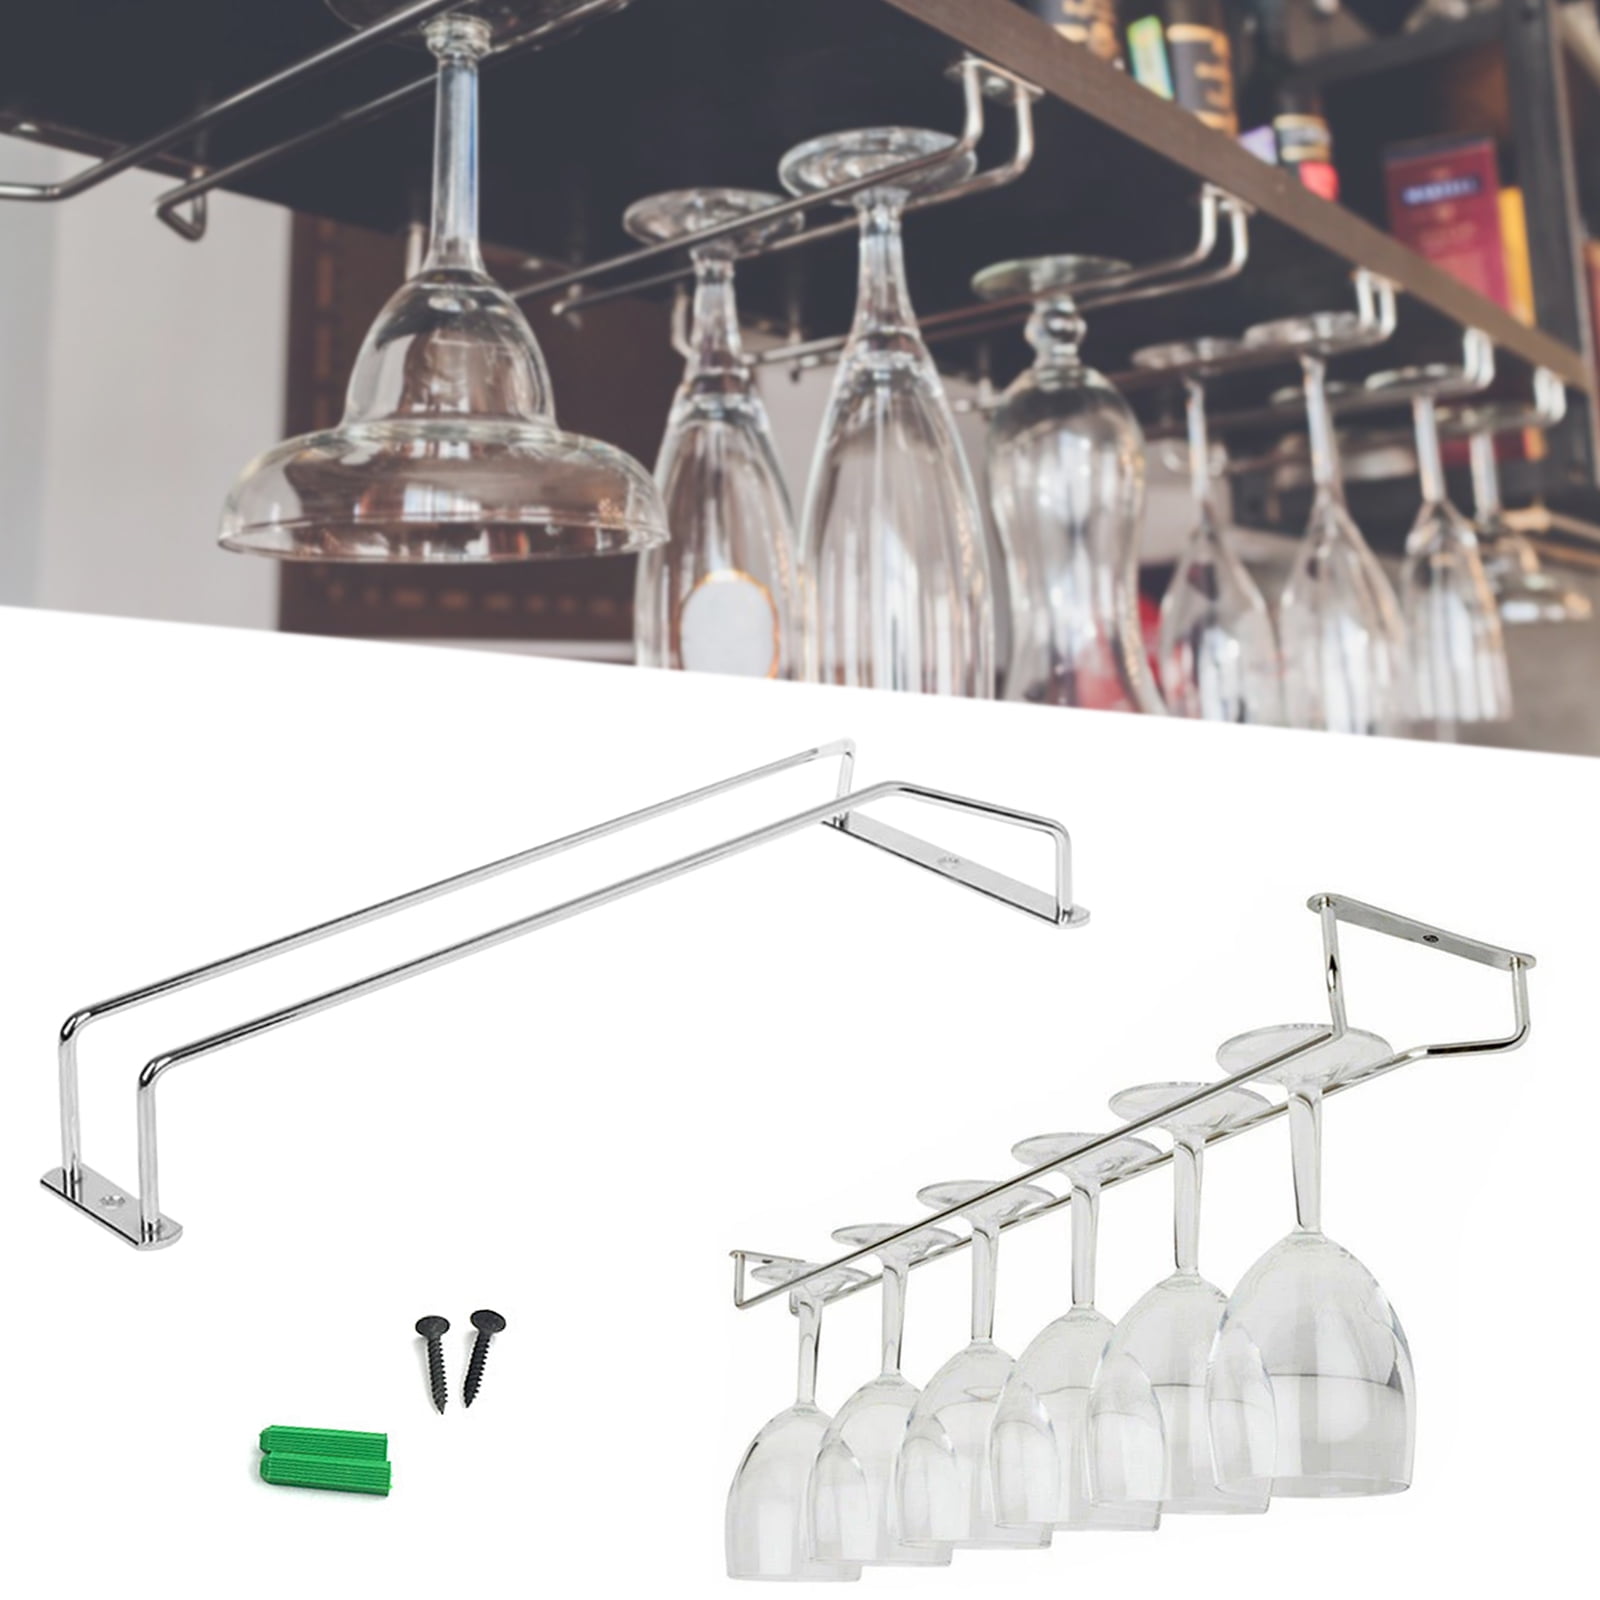 Pack U C Wine G H S S S G Se Rack H Wt Dr Home Bar: Home  Kn C $11.80 